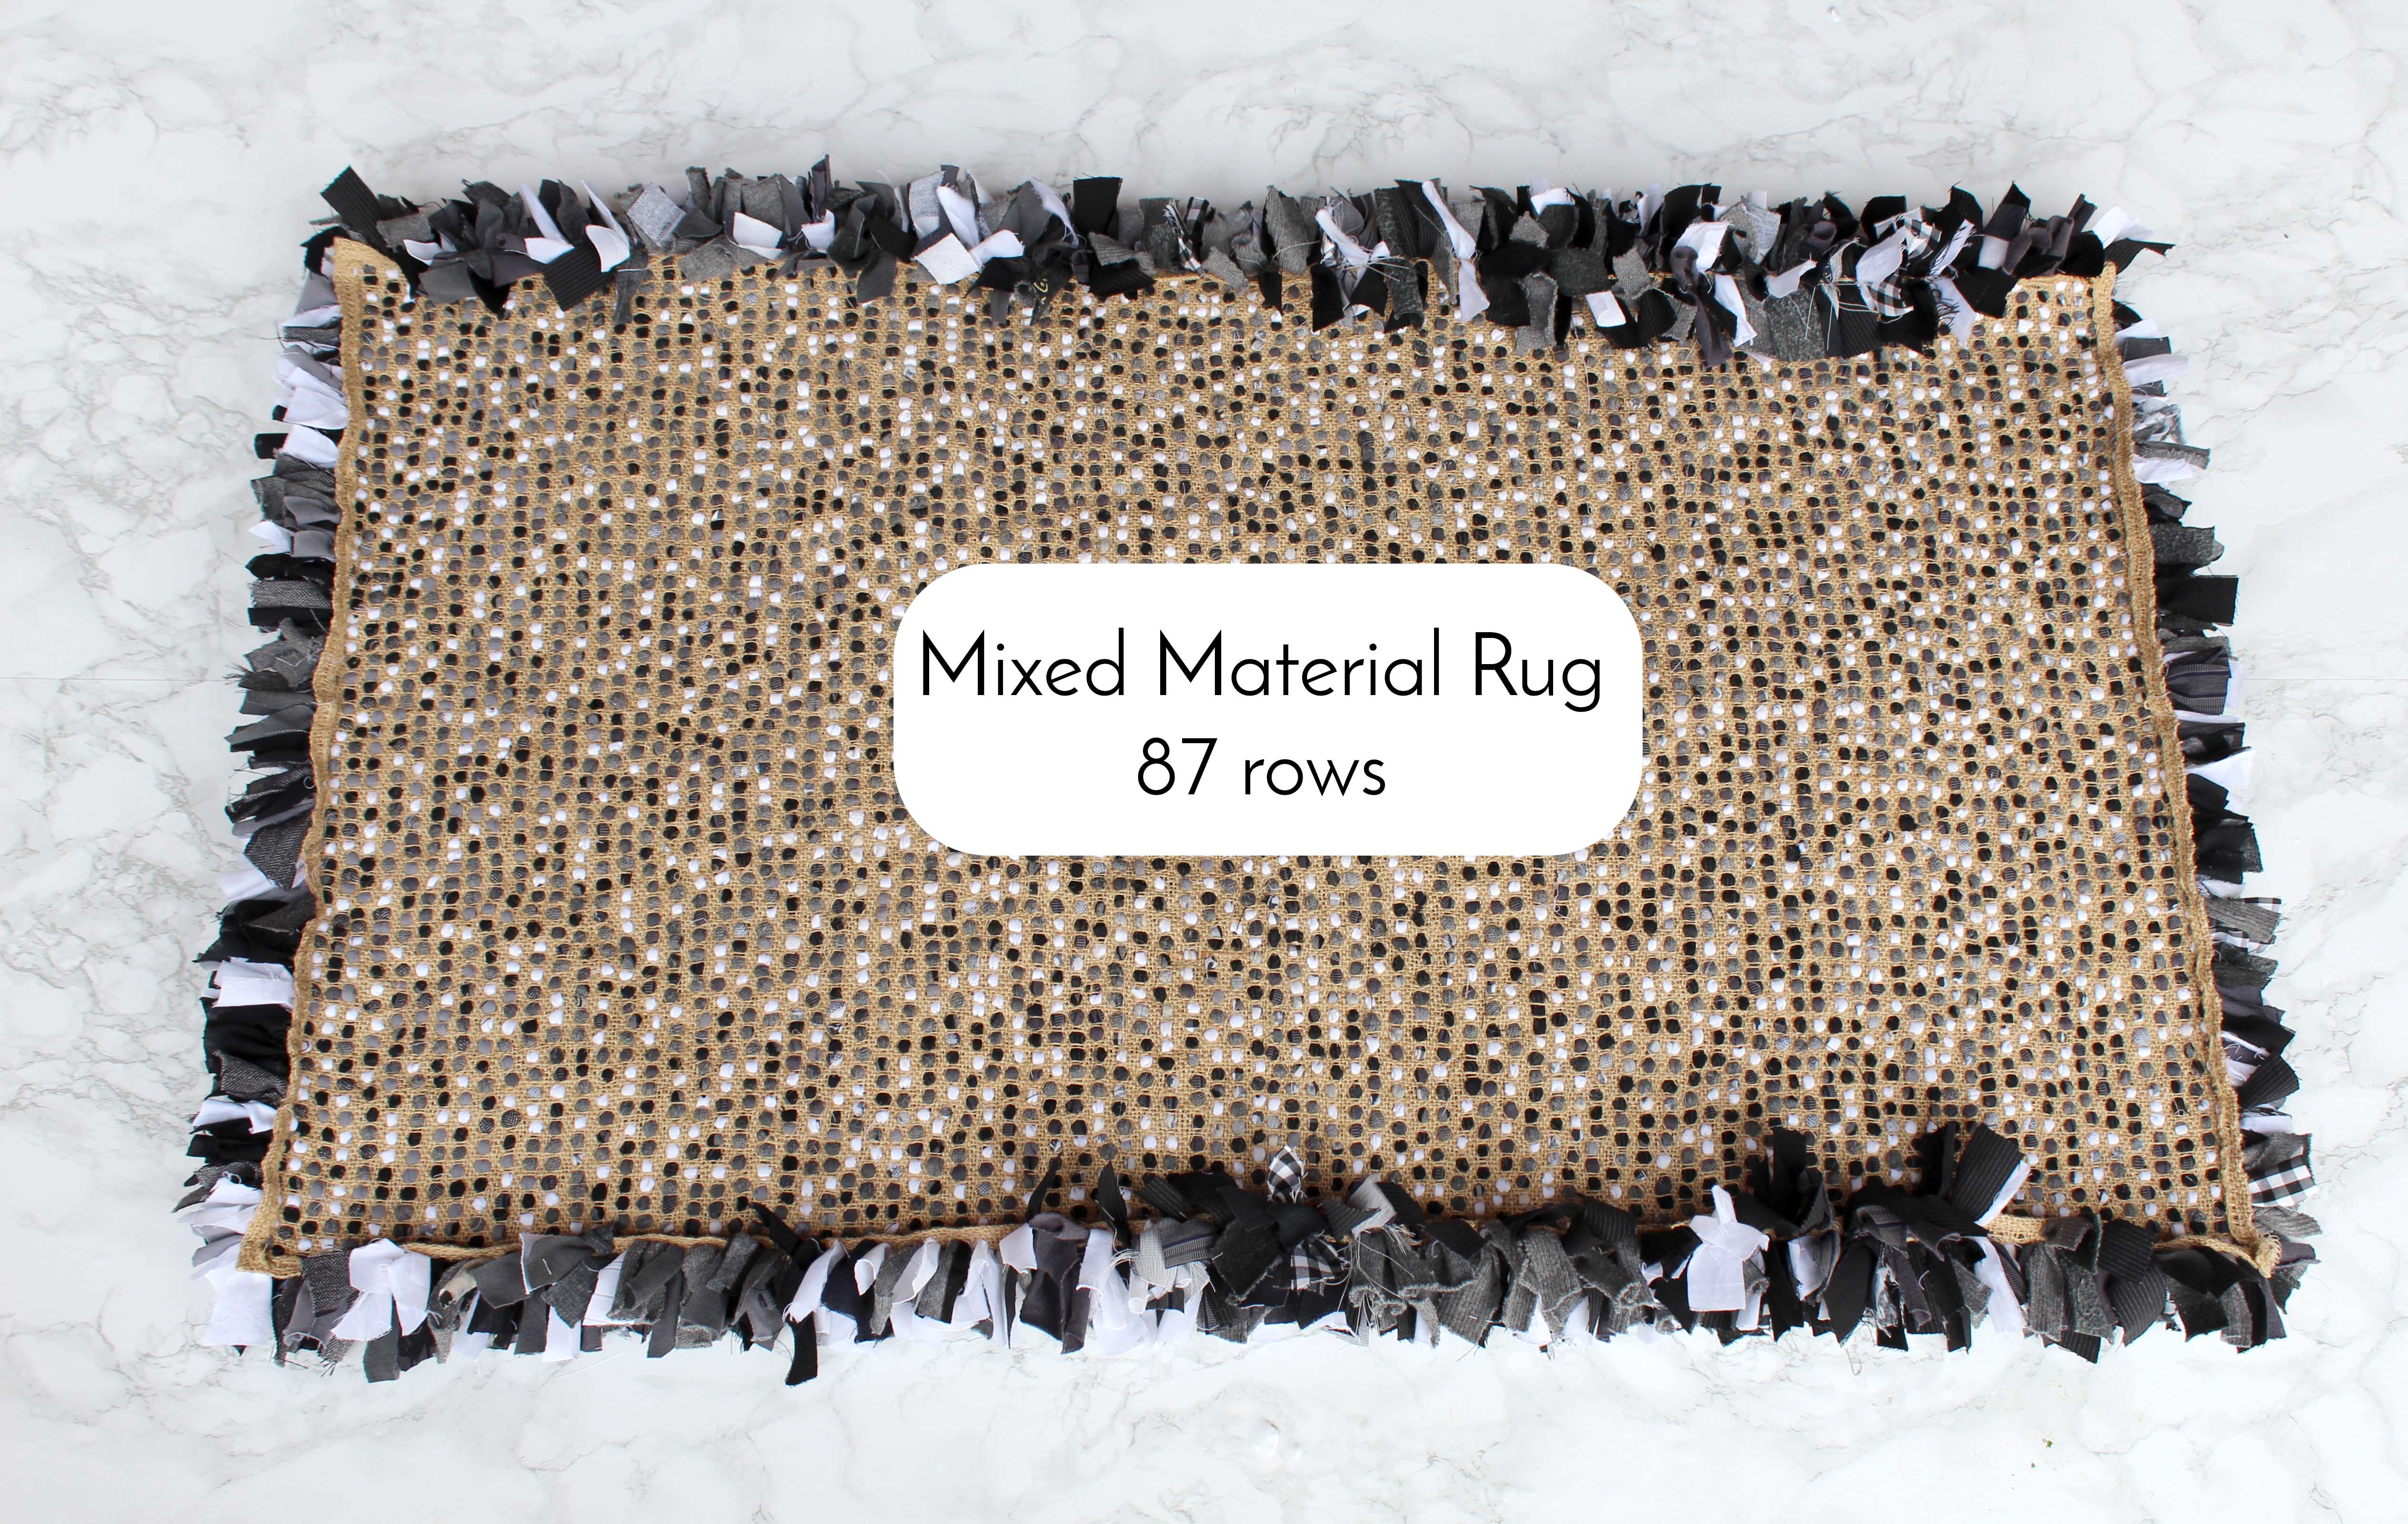 Black and white random shaggy rag rug from the back on the hessian